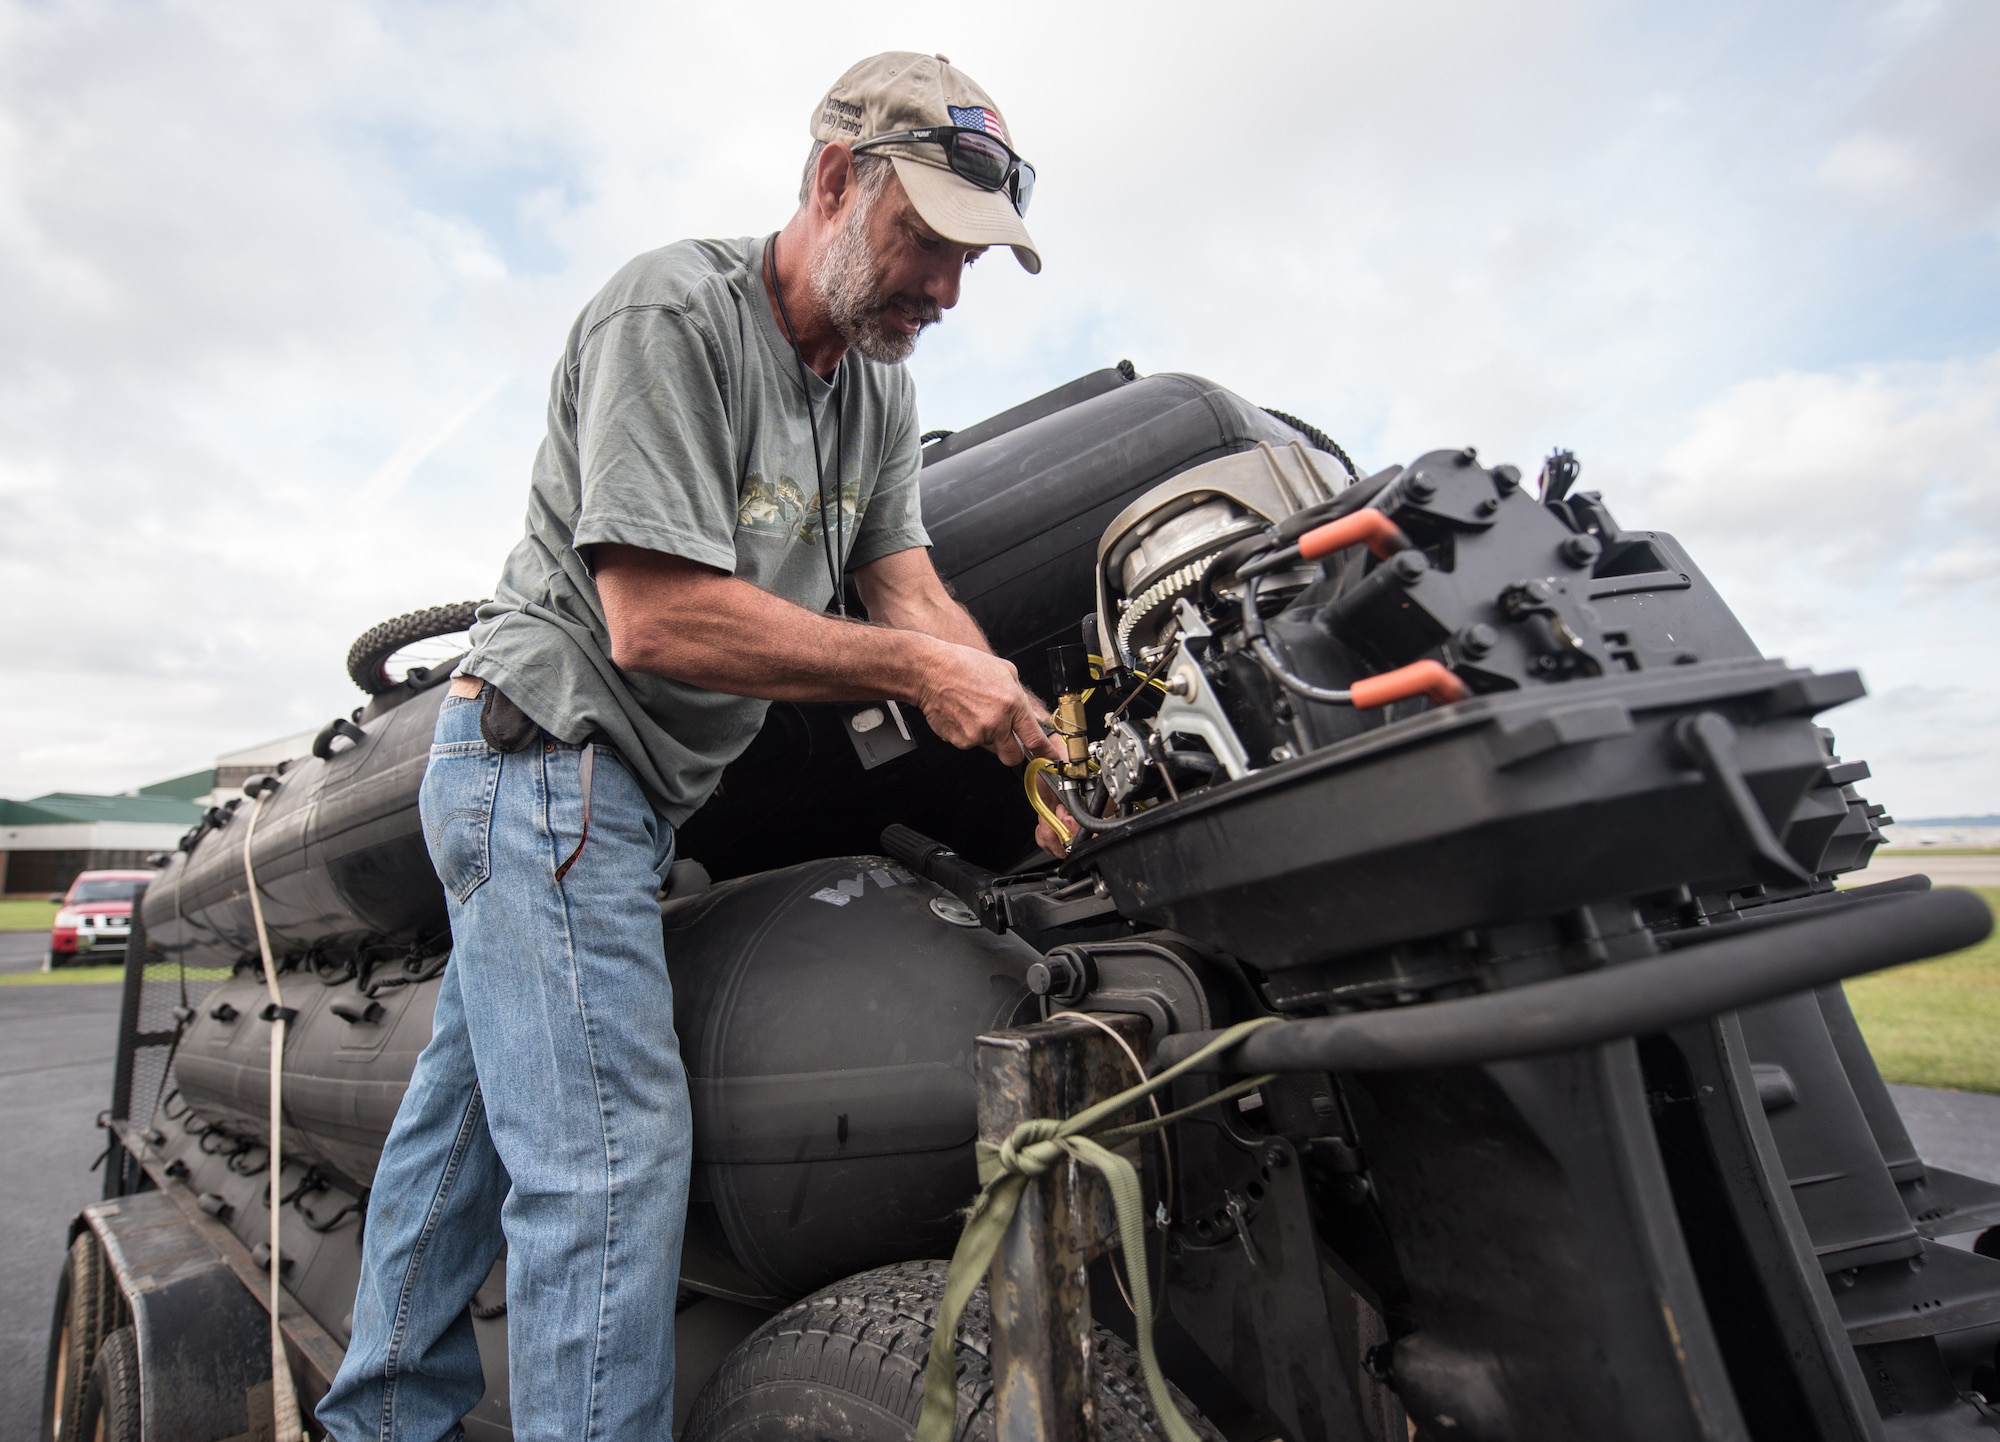 Gary King, a dive and maritime specialist assigned to the 123rd Special Tactics Squadron, works on the engine of a Zodiac boat at the Kentucky Air Guard Base in Louisville, Ky., Sept. 12, 2018.  The boats will be used by 123rd STS special operators who are deploying to the East Coast in response to Tropical Storm Florence.